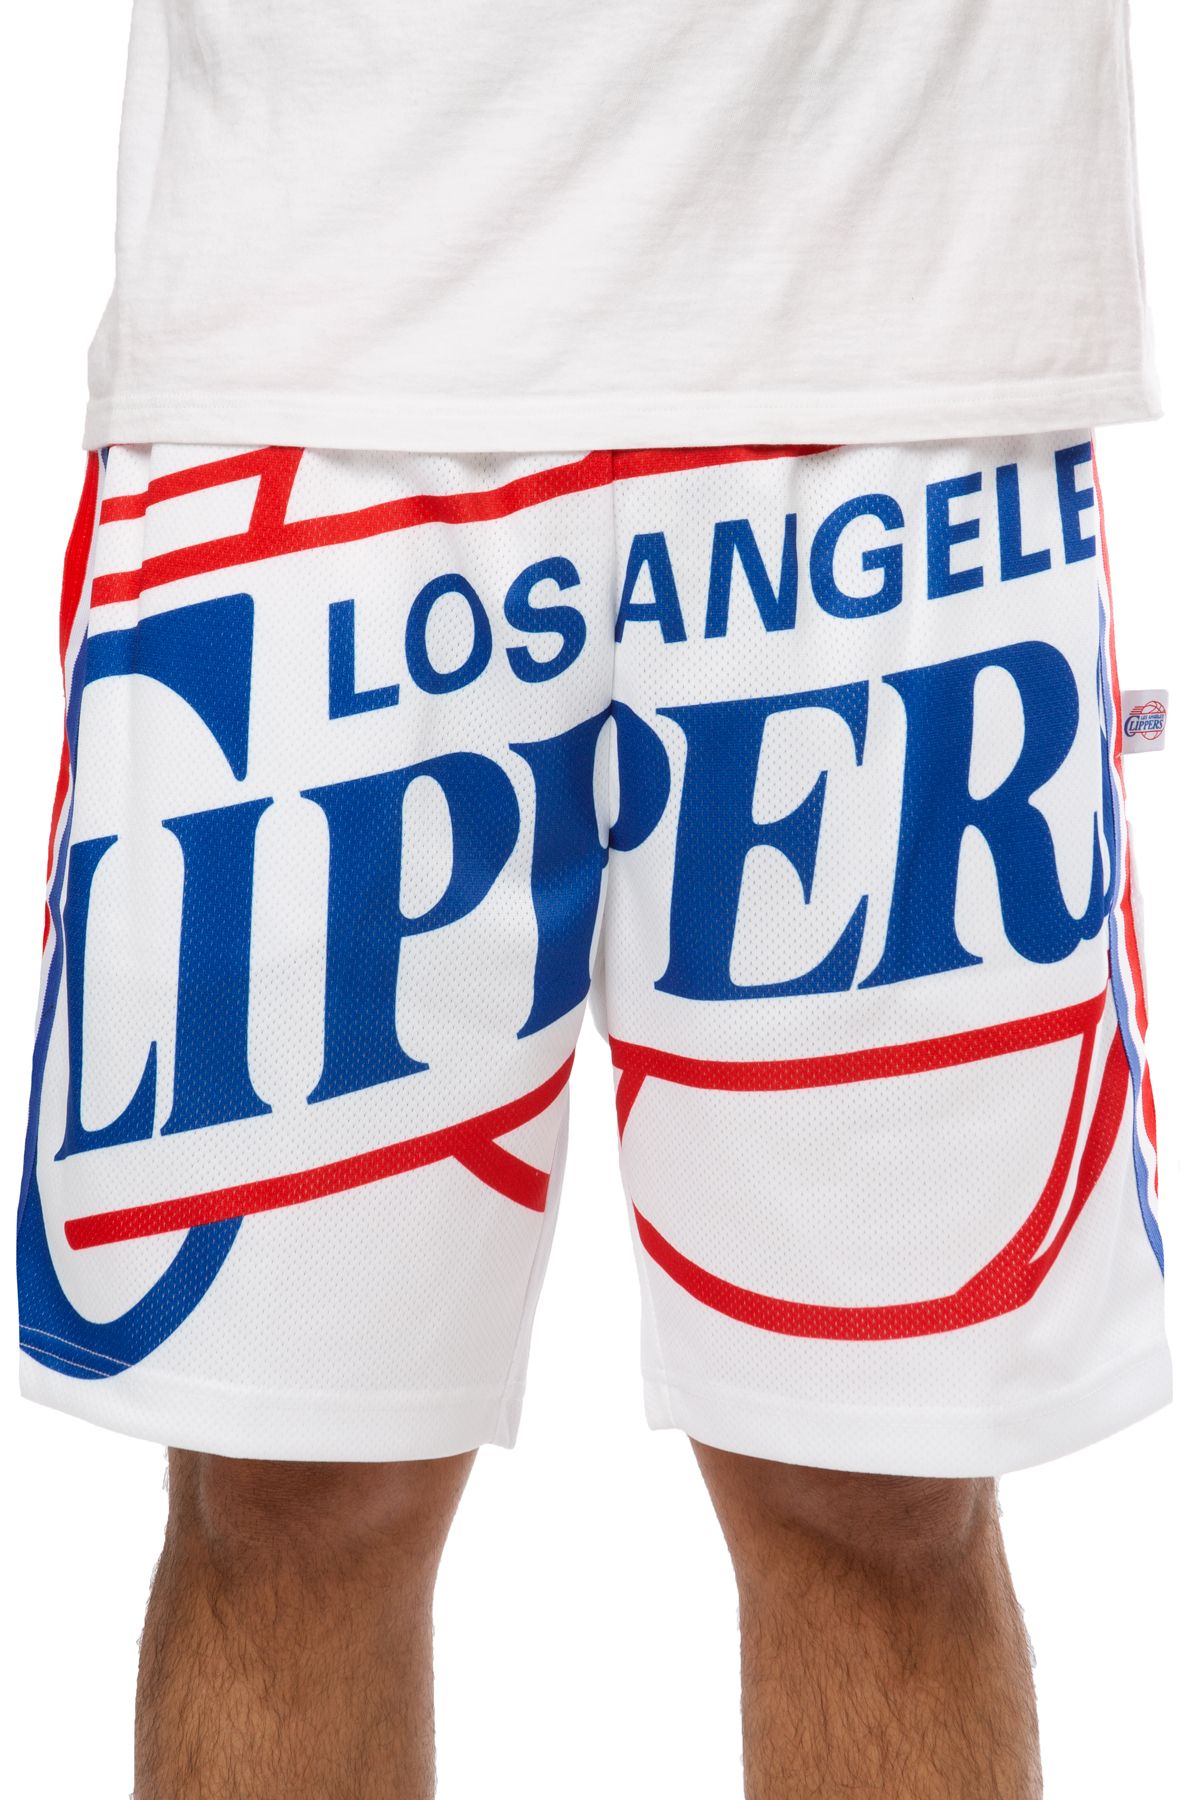 Mitchell & Ness Authentic Shorts San Diego Clippers 1980-81